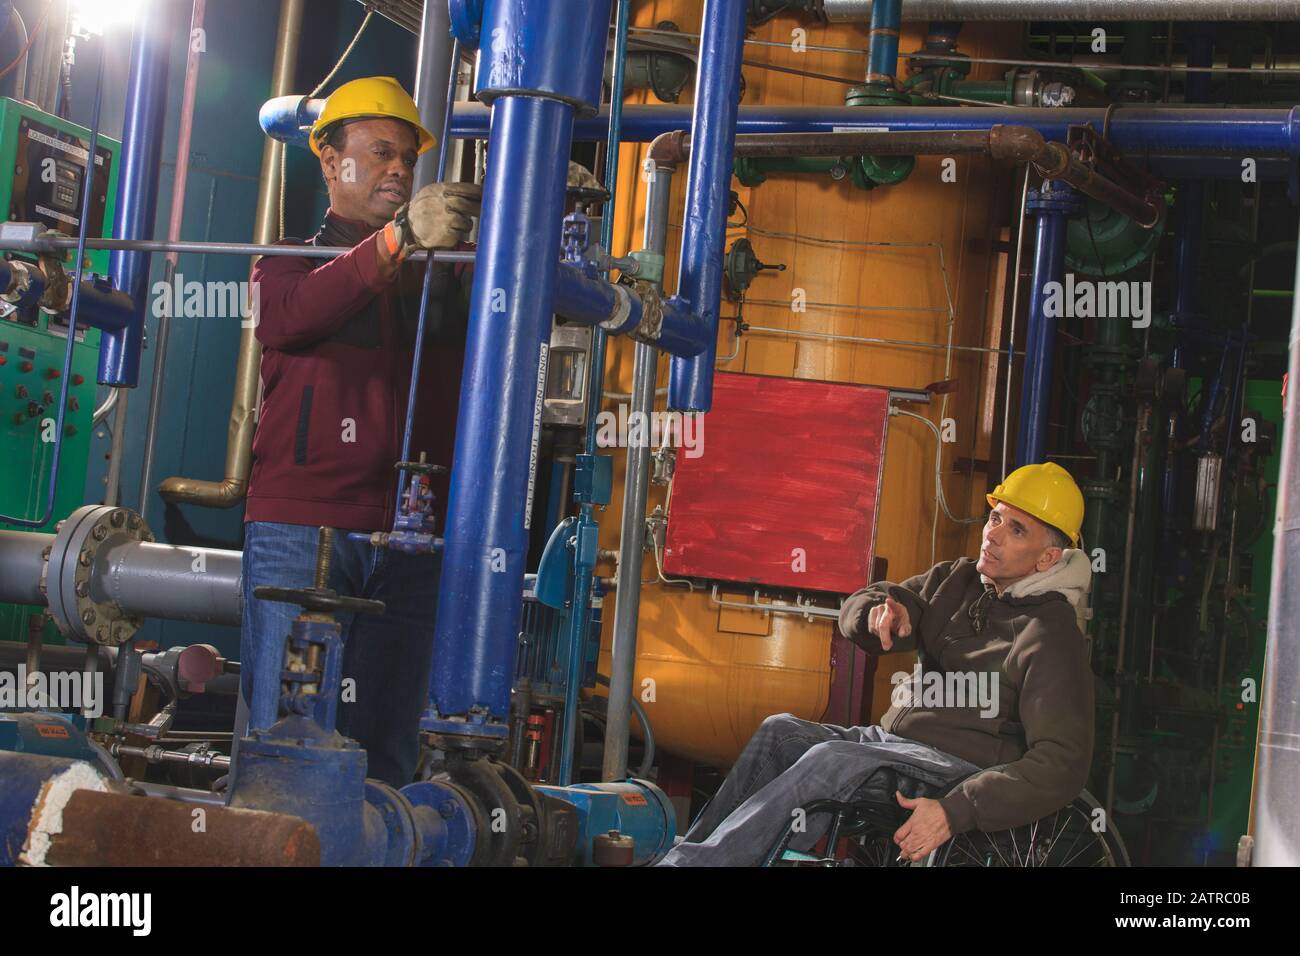 Disabled worker and a co-worker working in an industrial workplace Stock Photo